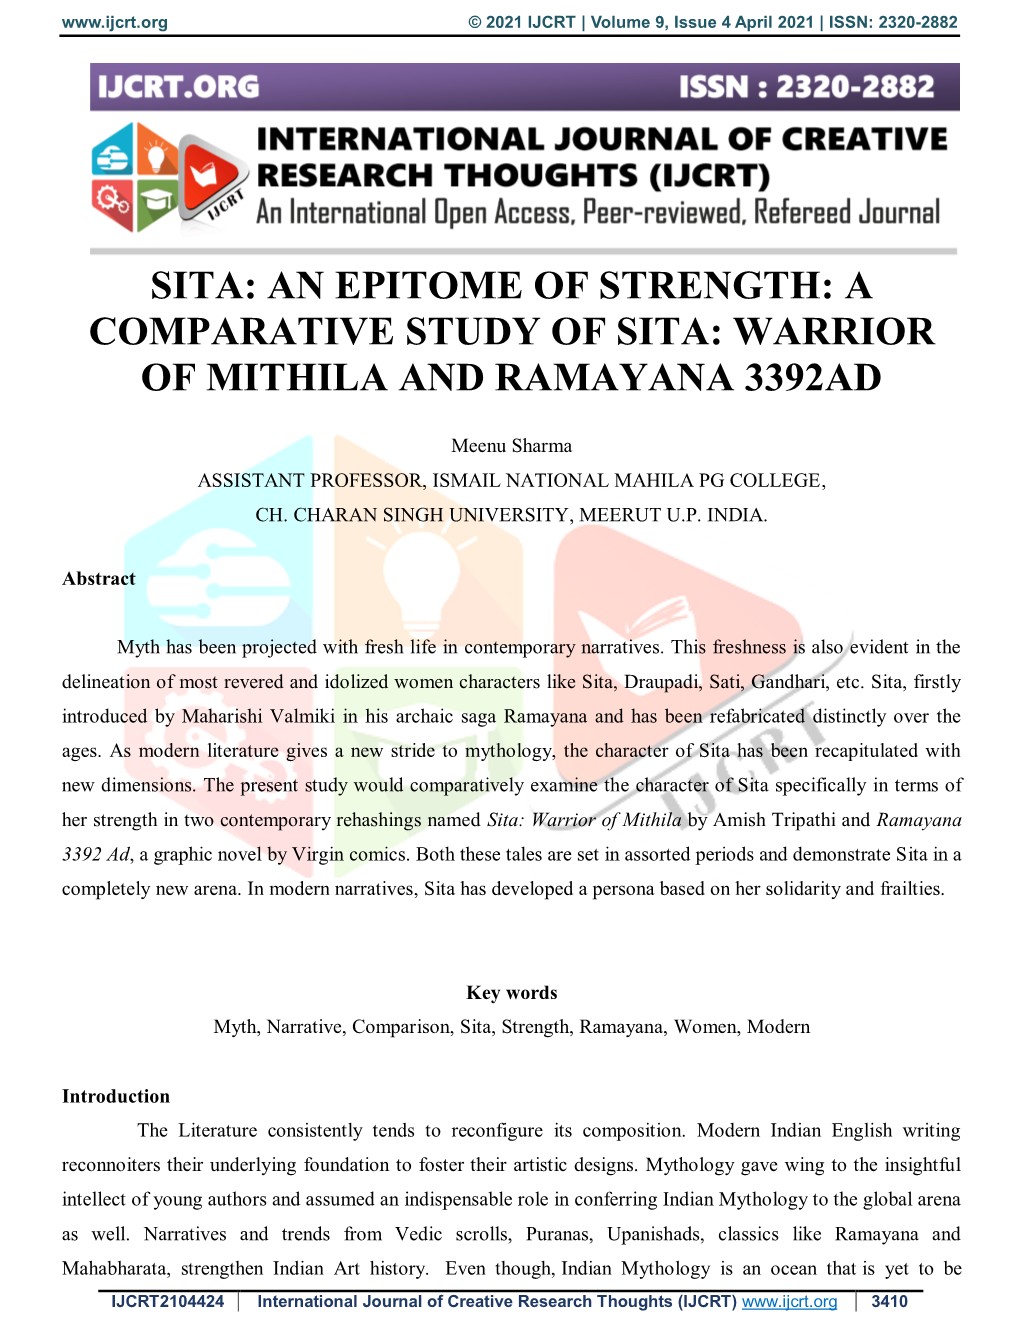 A Comparative Study of Sita: Warrior of Mithila and Ramayana 3392Ad